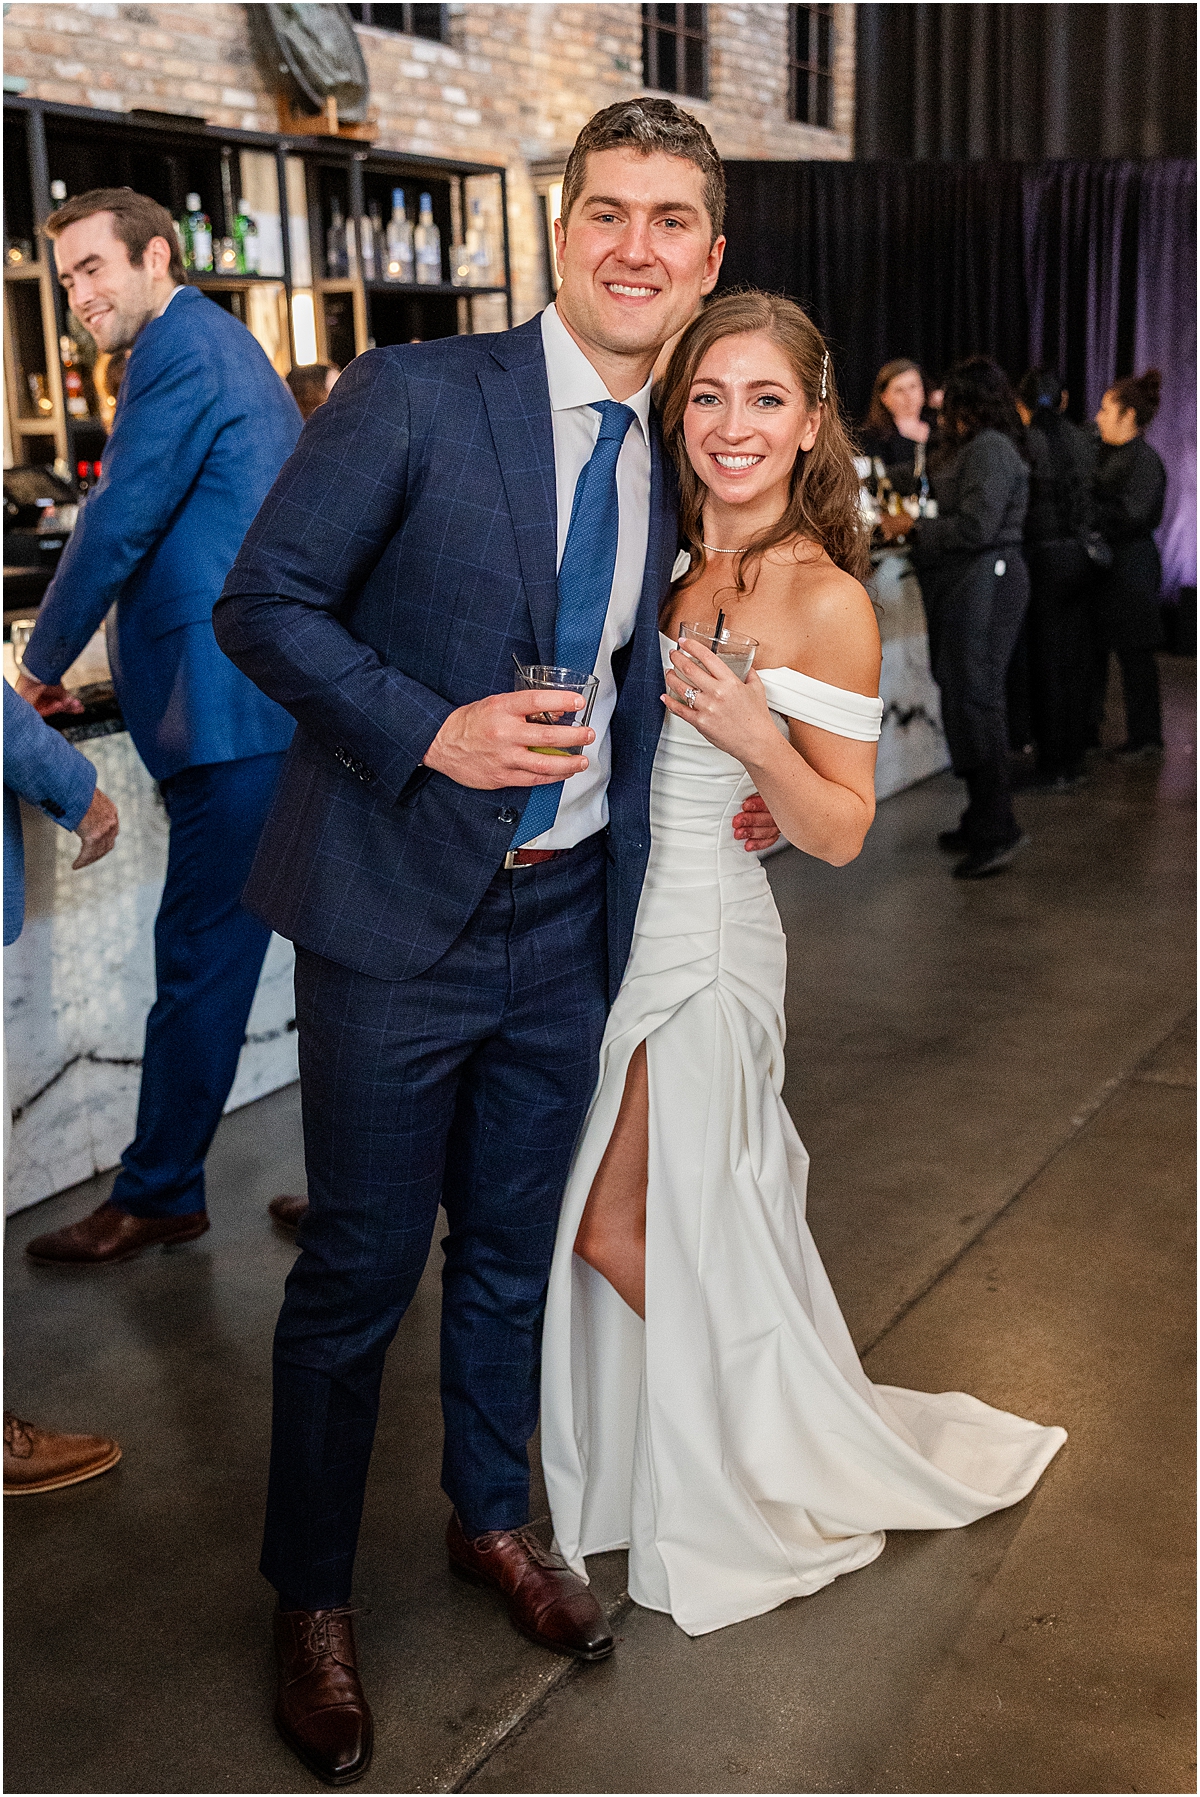 newlyweds at their Chic Chicago Wedding Celebration at City Hall Chicago Events